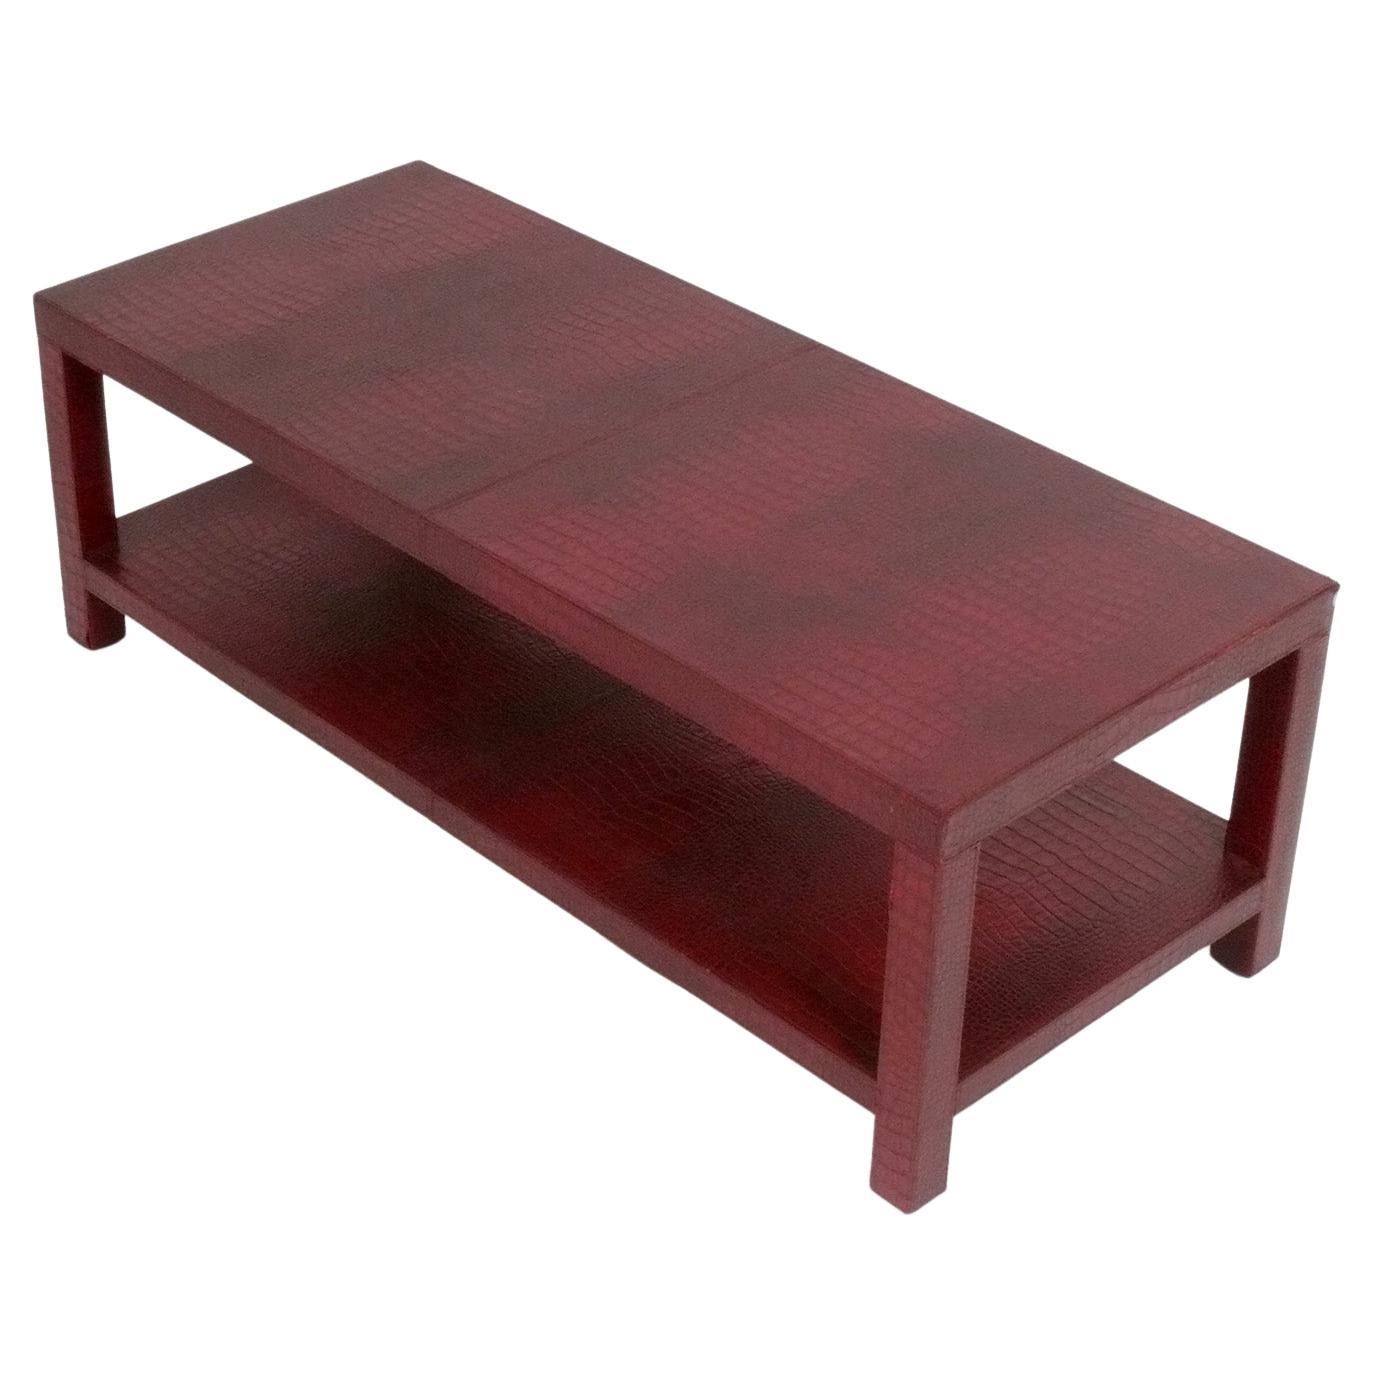 French Faux Alligator Embossed Red Leather Coffee Table by Dominic Chambon